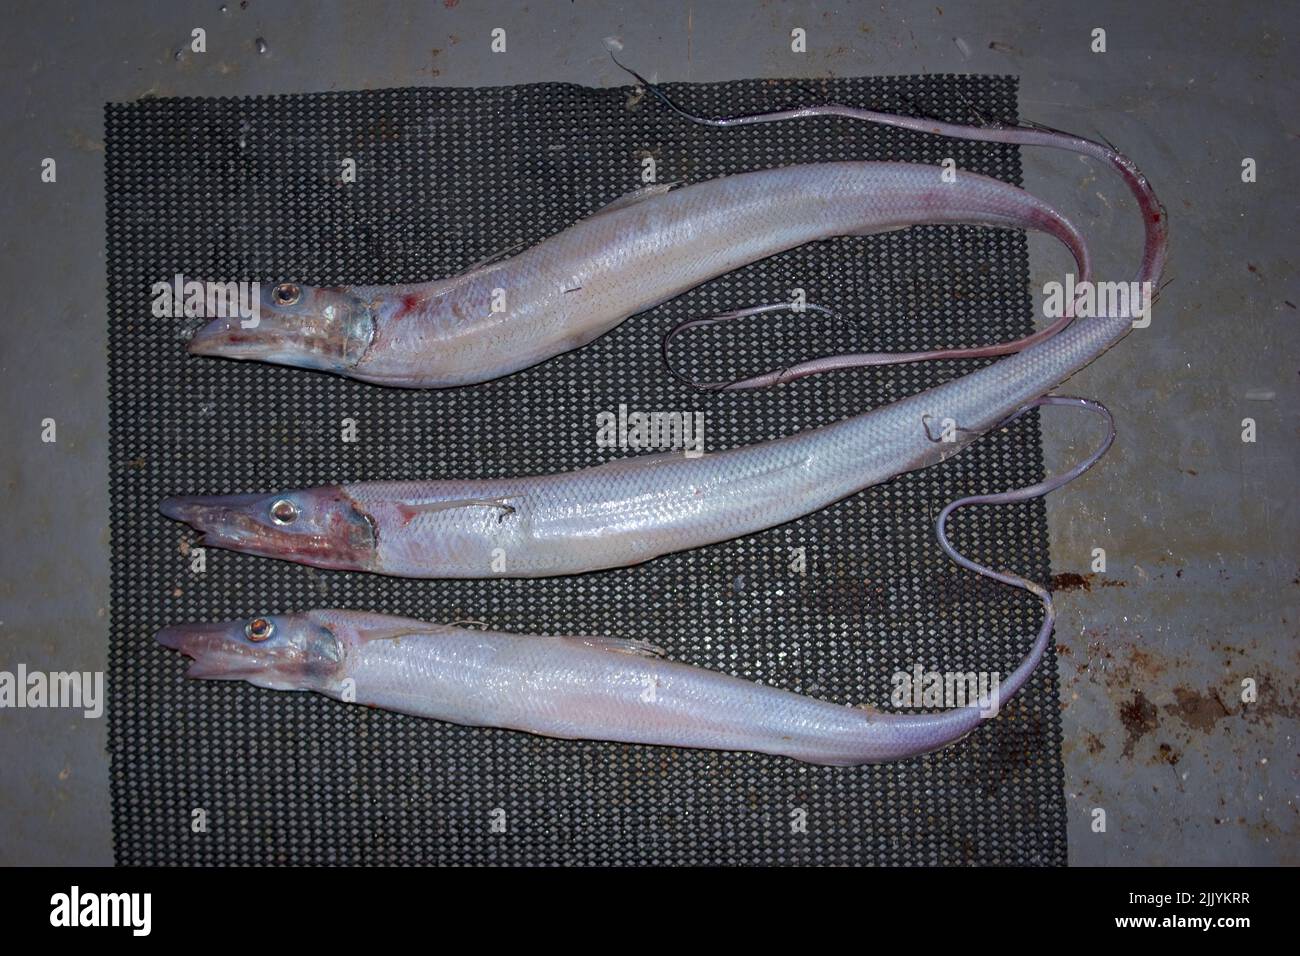 A Look at life in New Zealand: Freshly landed catch (Abyssal Halosaurs: Halosauropsis macrochir), from a deep-sea trawl. Stock Photo